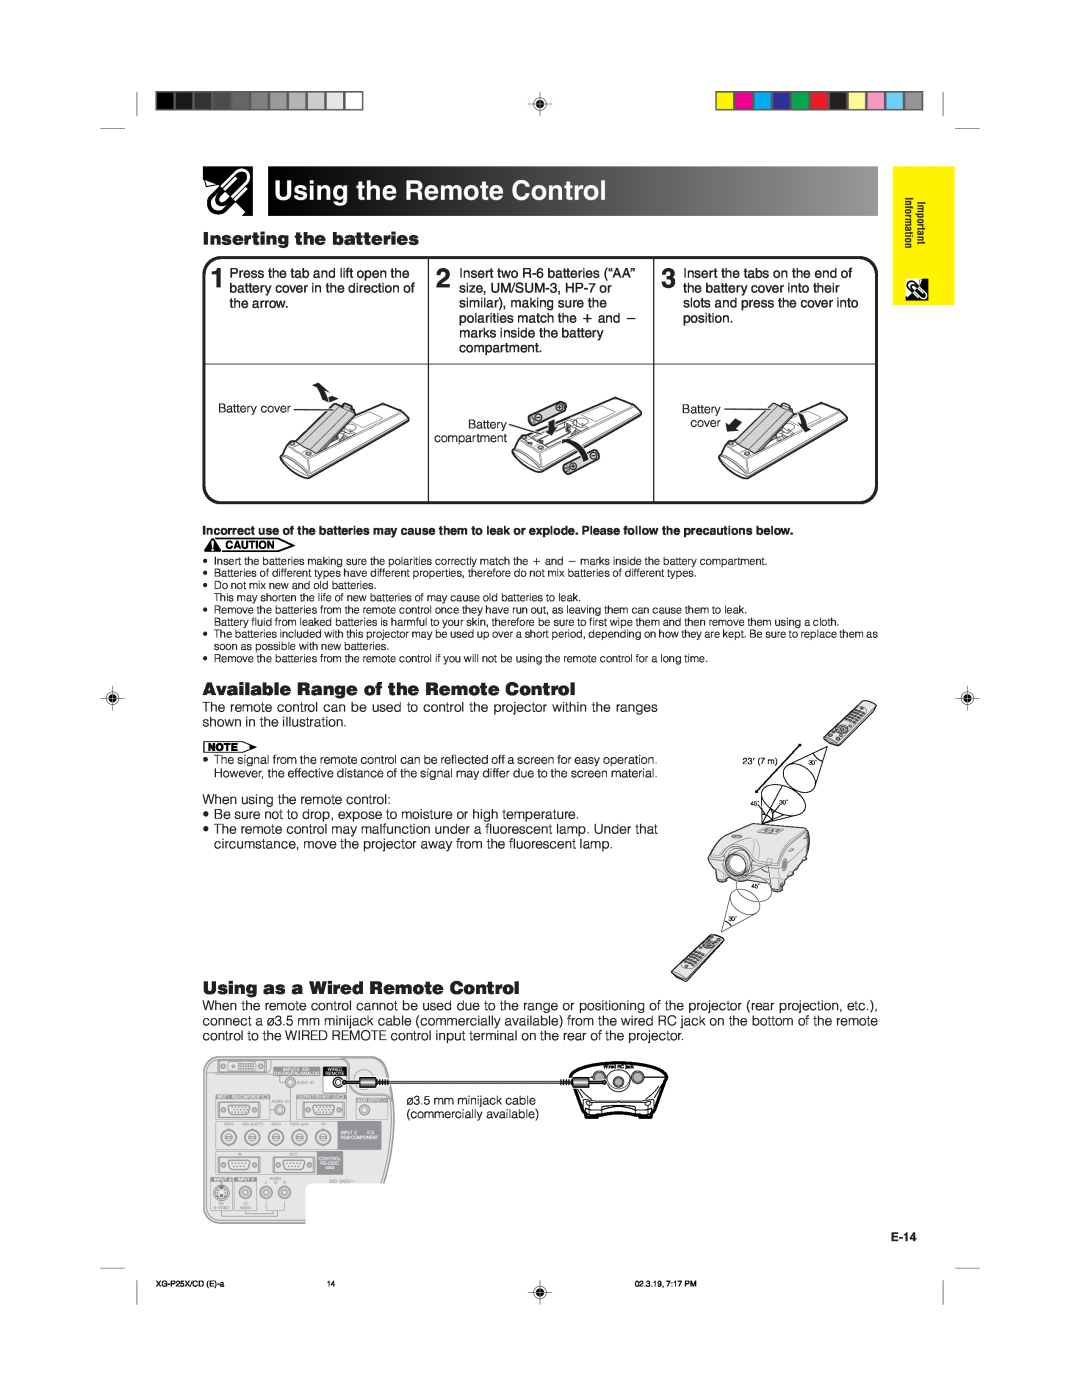 Sharp XG-P25X operation manual Using the Remote Control, Inserting the batteries, Available Range of the Remote Control 